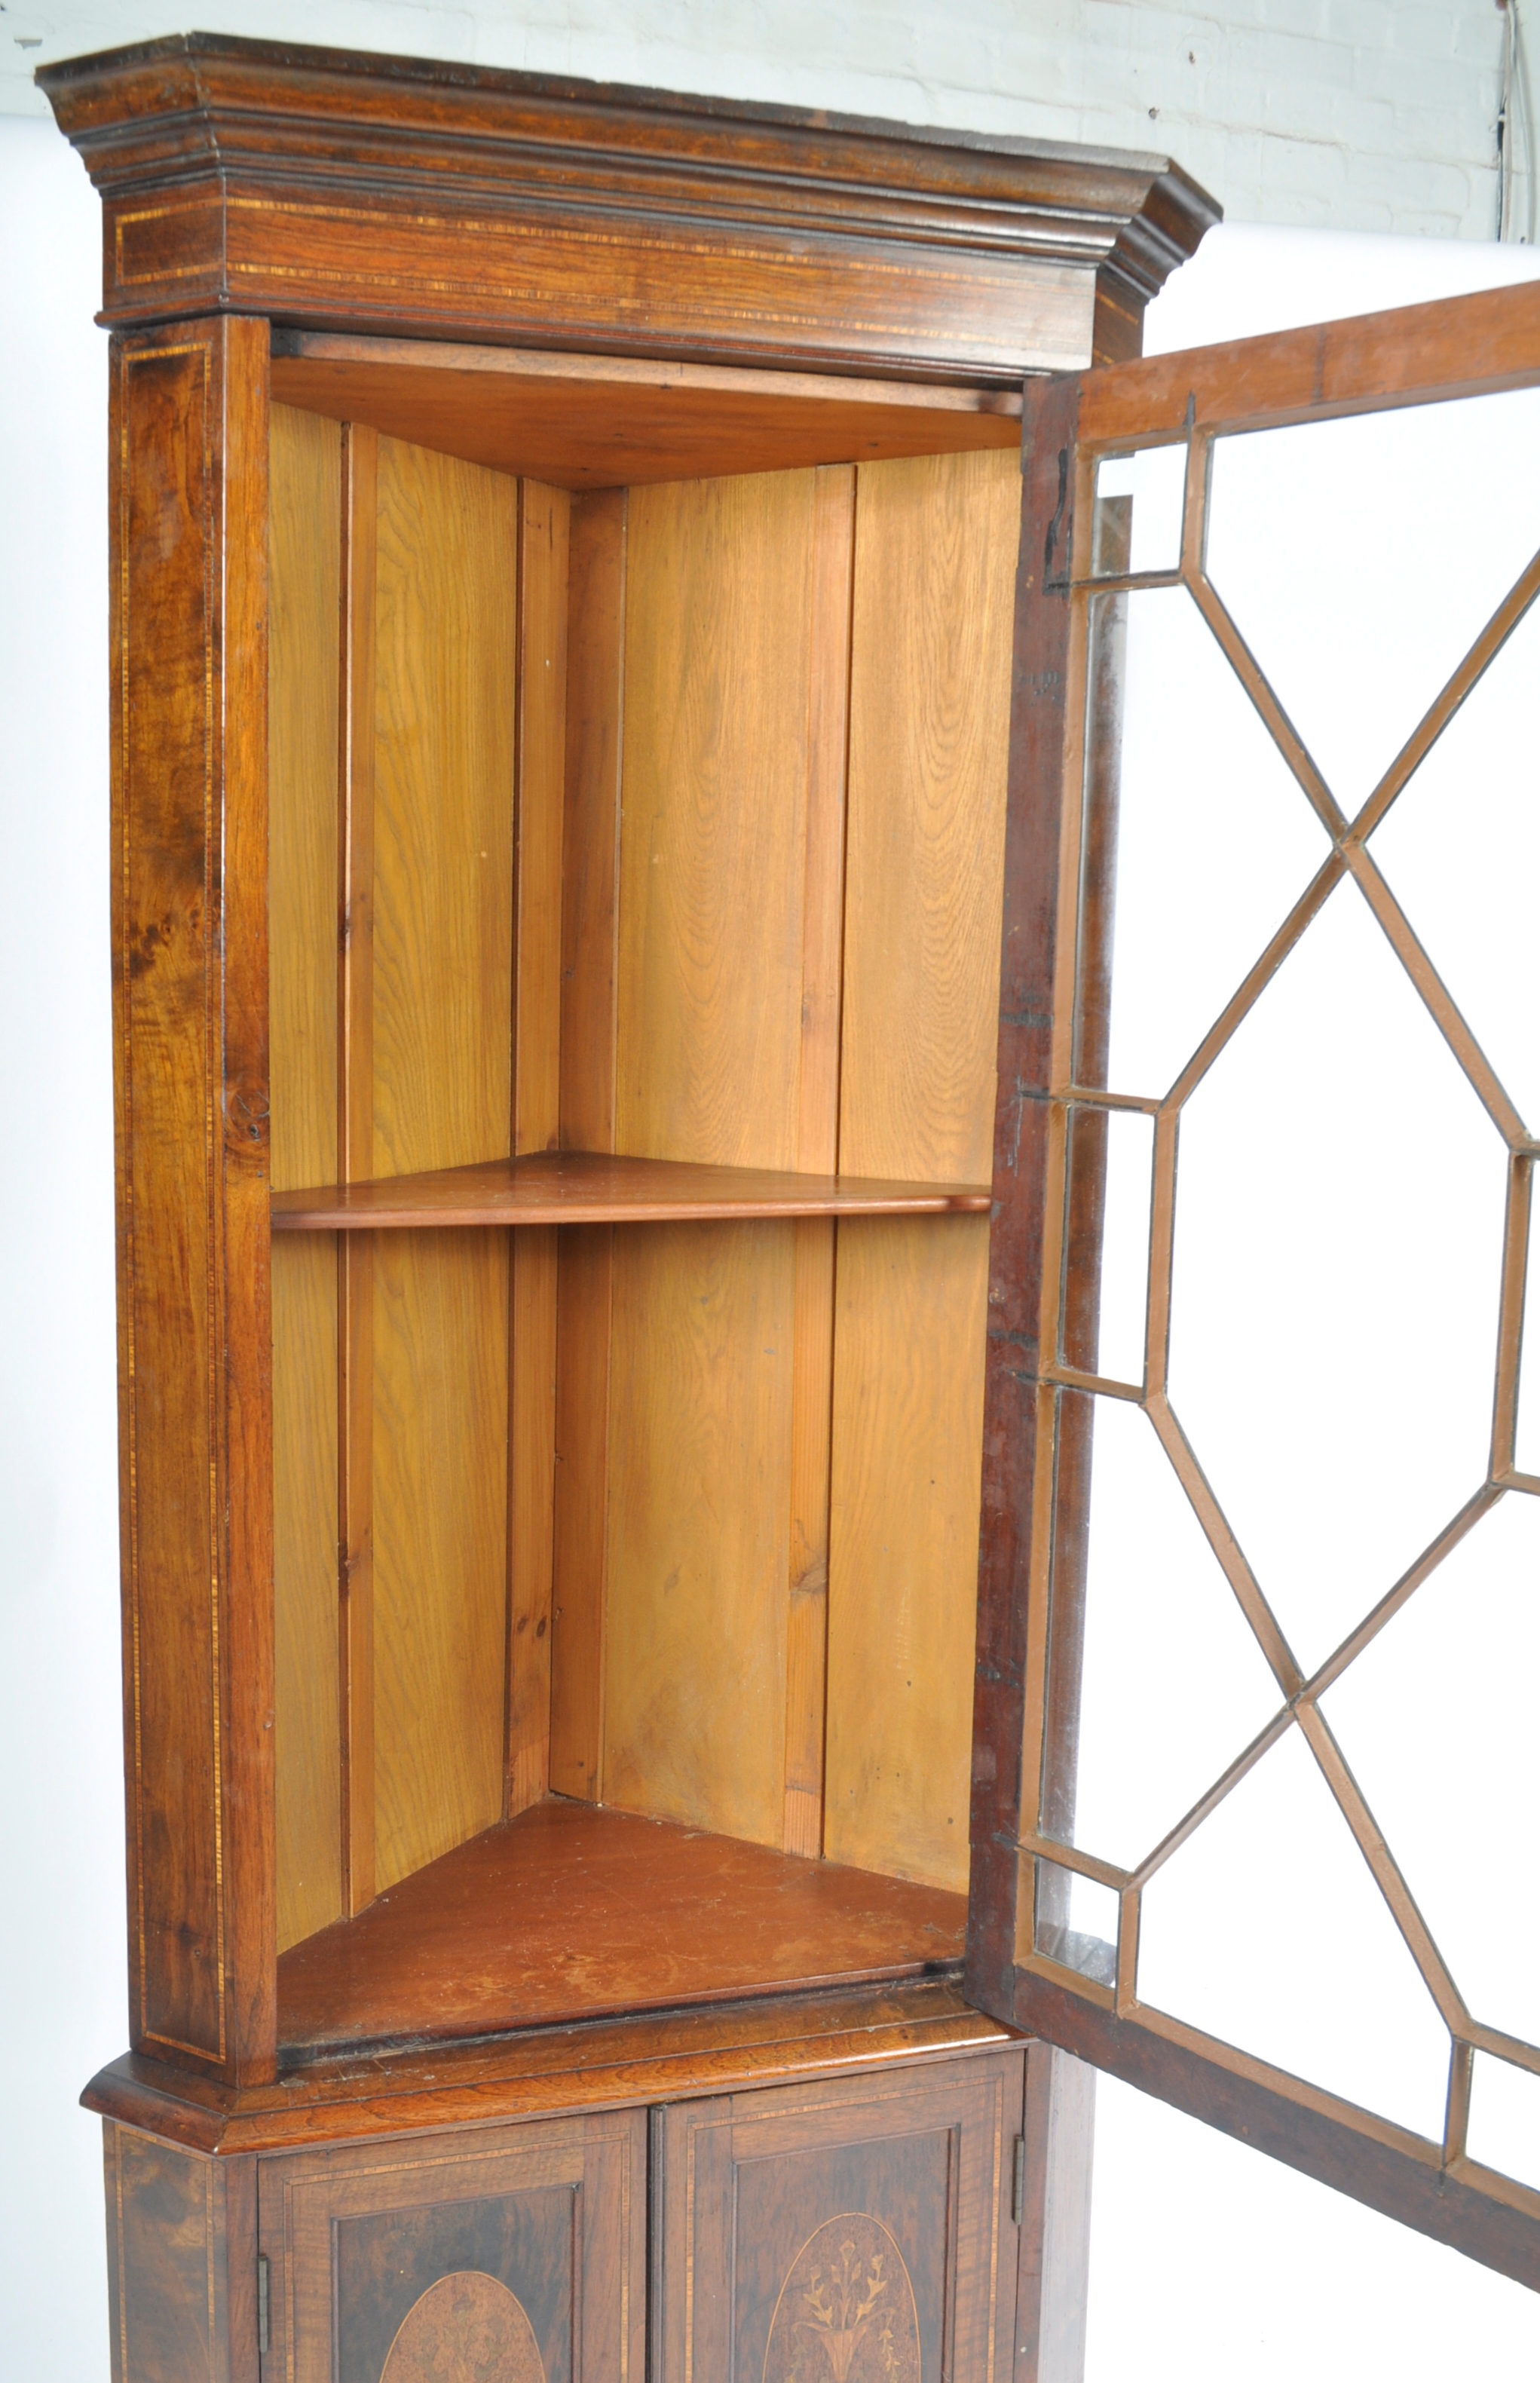 EDWARDIAN MARQUETRY INLAID ROSEWOOD CORNER CABINET - Image 5 of 7